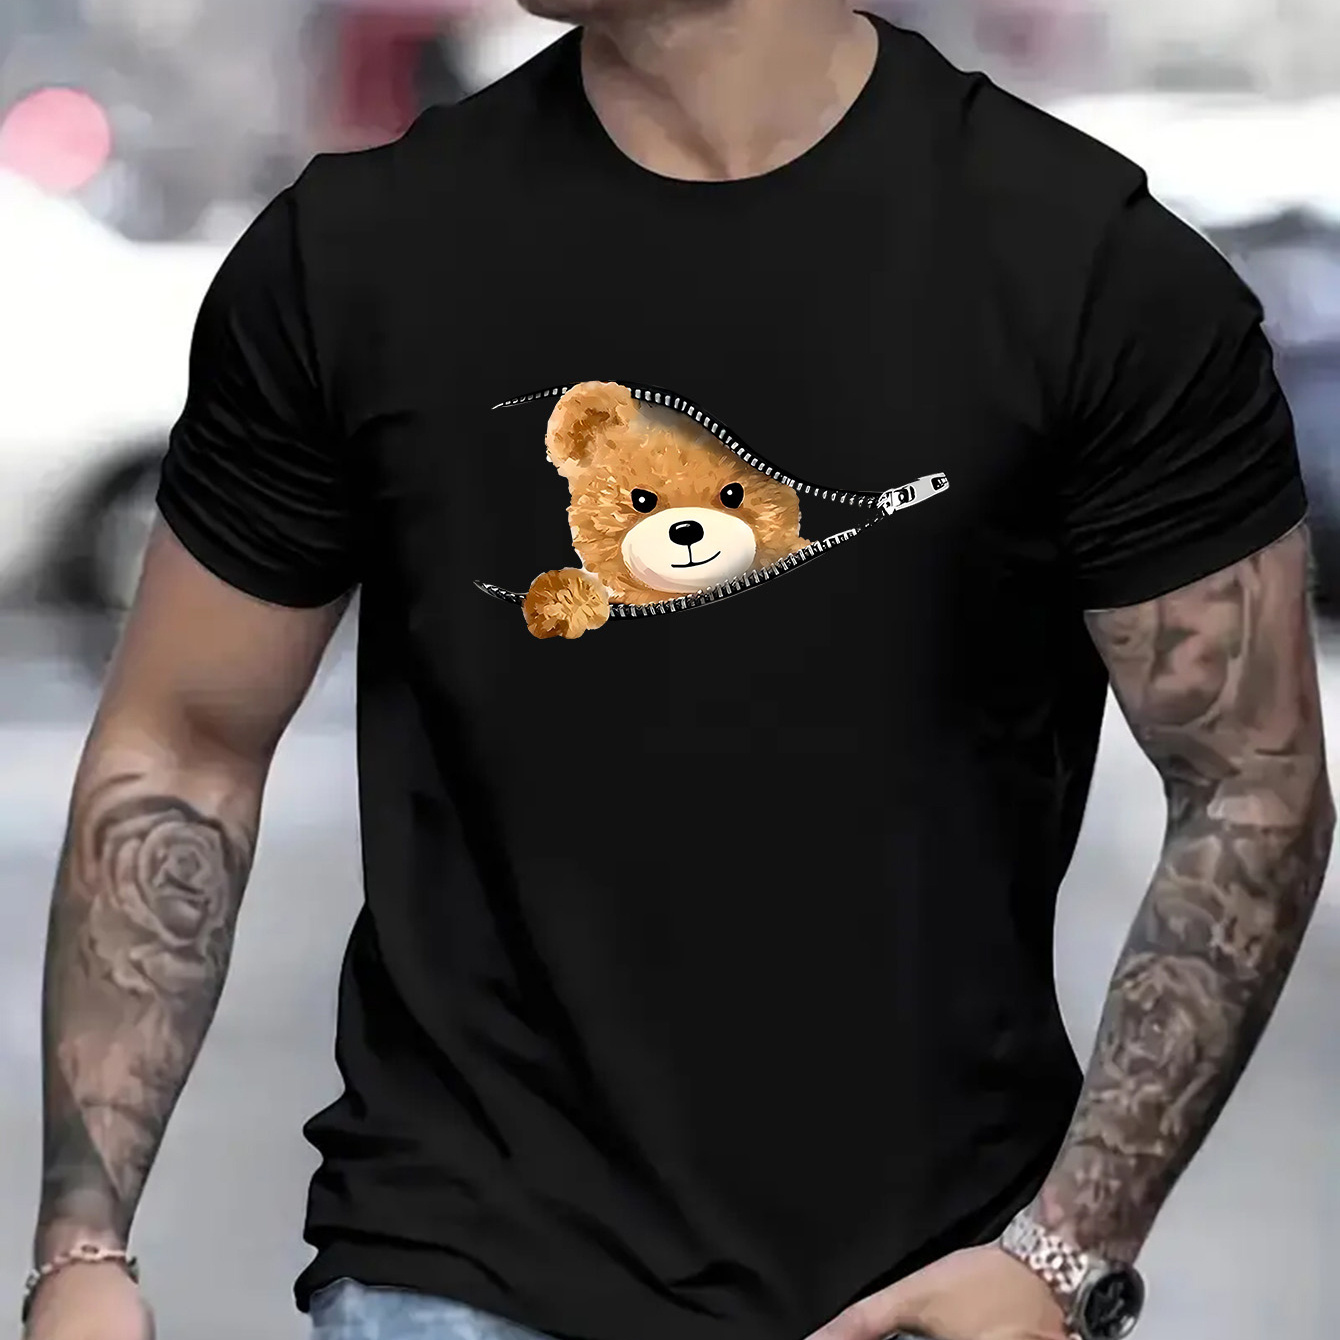 

Men's Stylish T-shirts, Casual Crew Neck Short Sleeves With Funny Bear Print Summer Comfort Tops